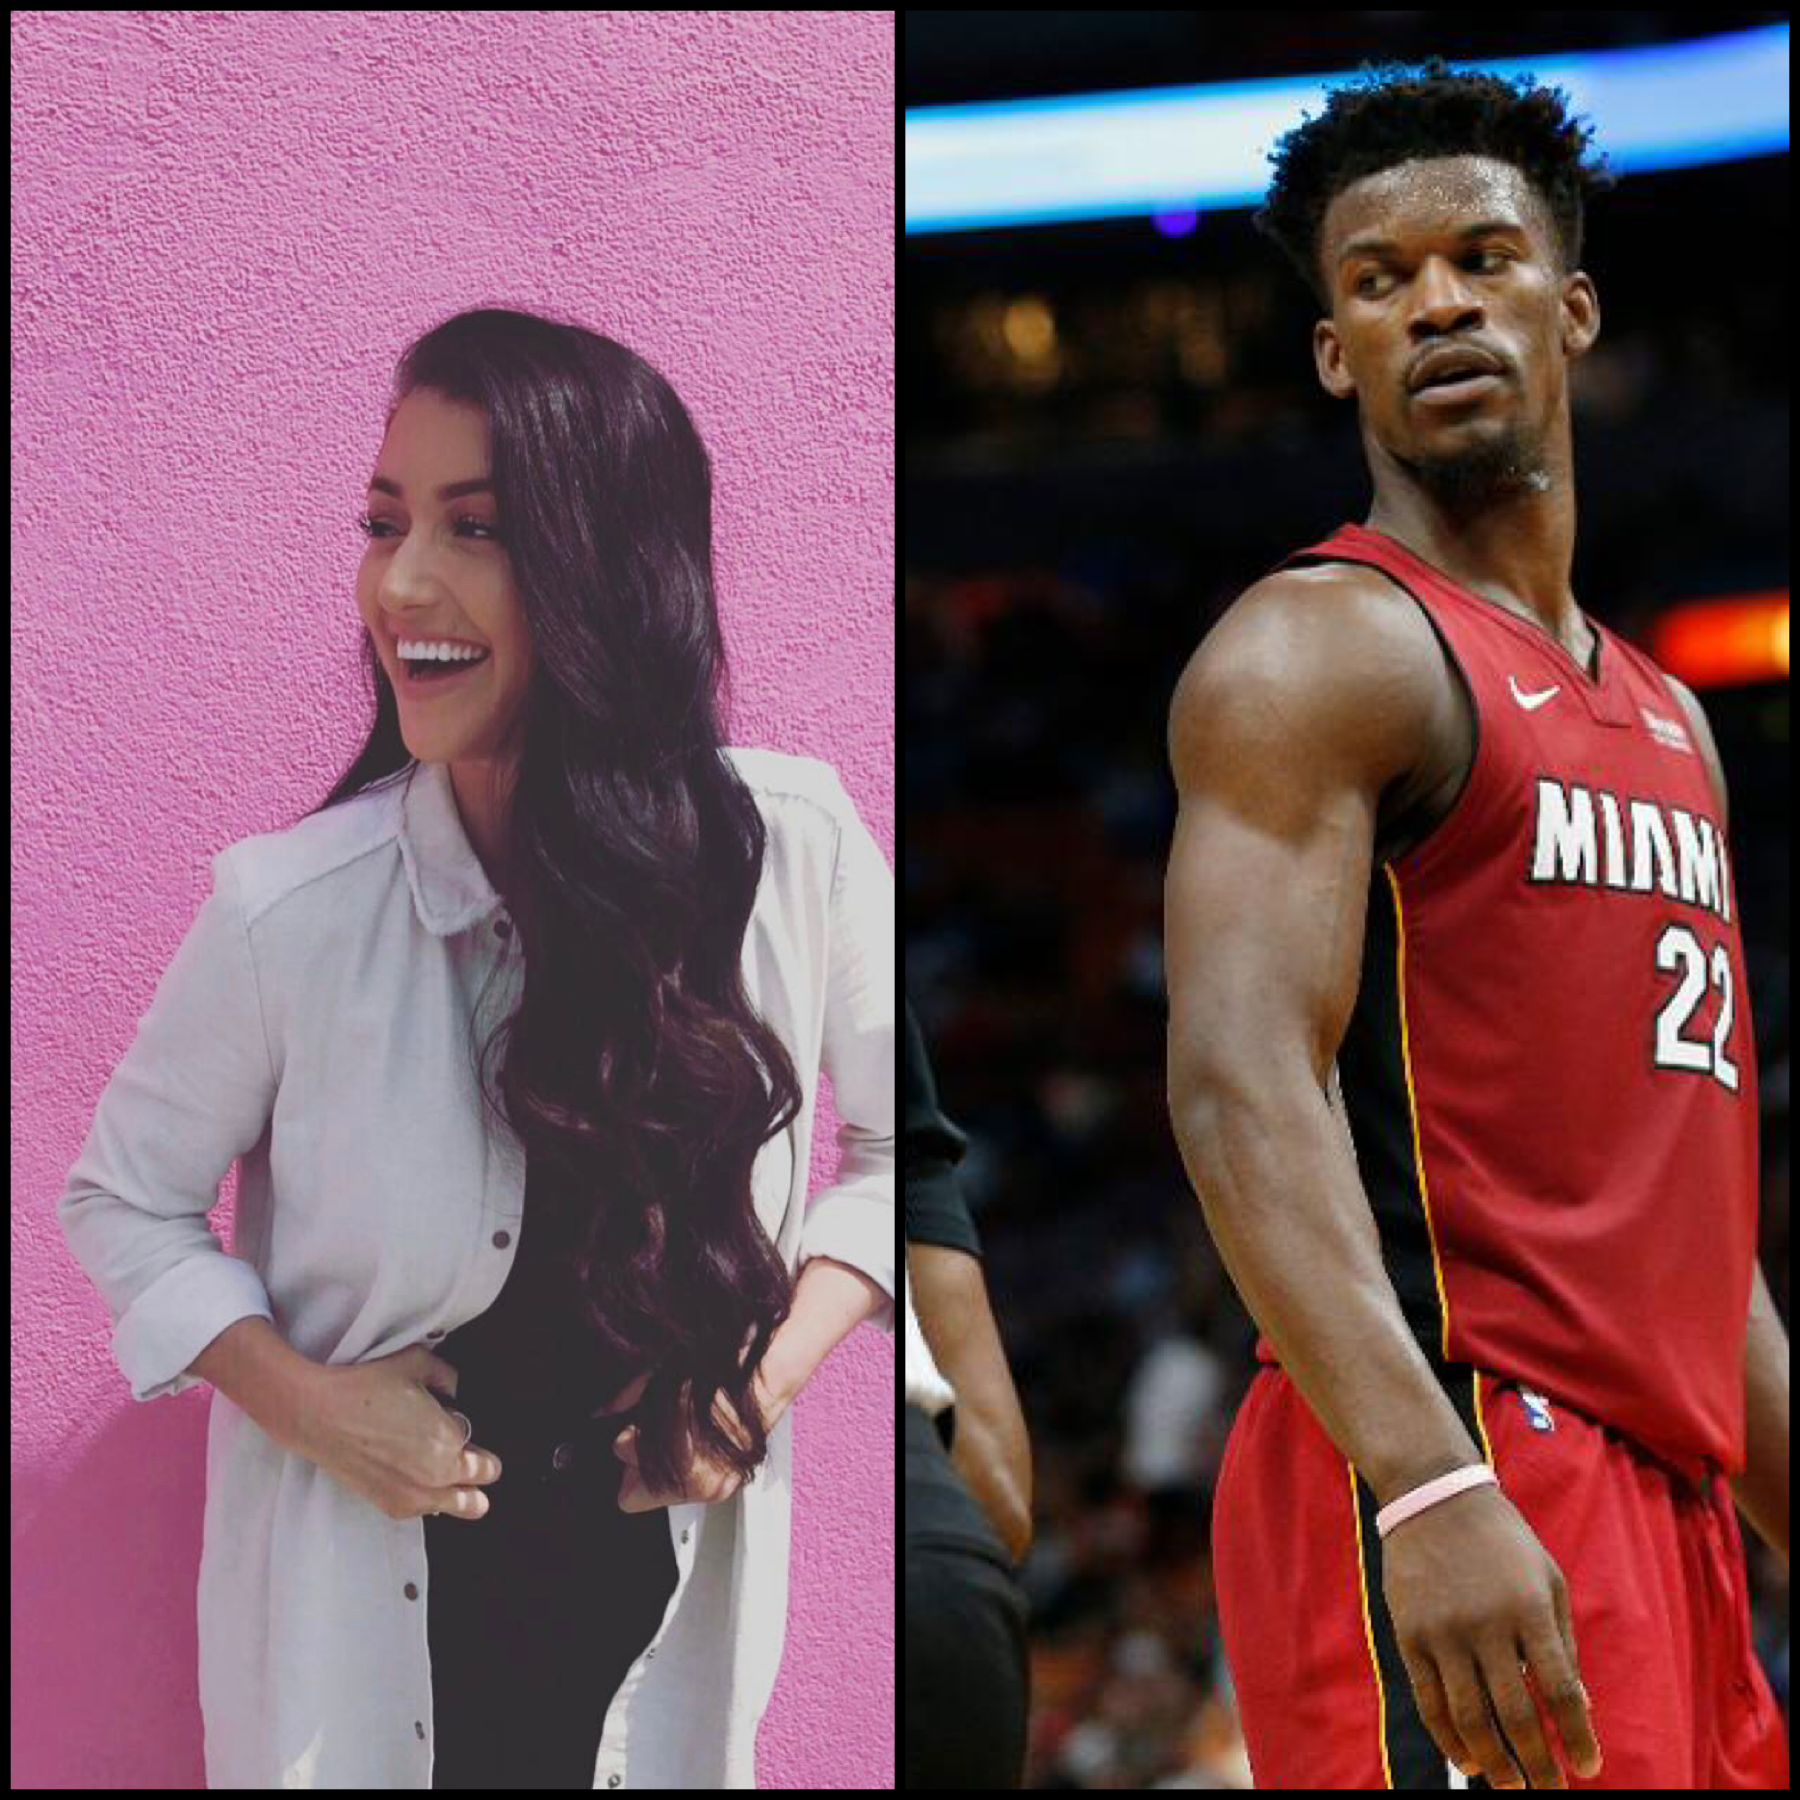 Kaitlin Nowak, who is the mother of Jimmy Butler’s daughter posted several ...